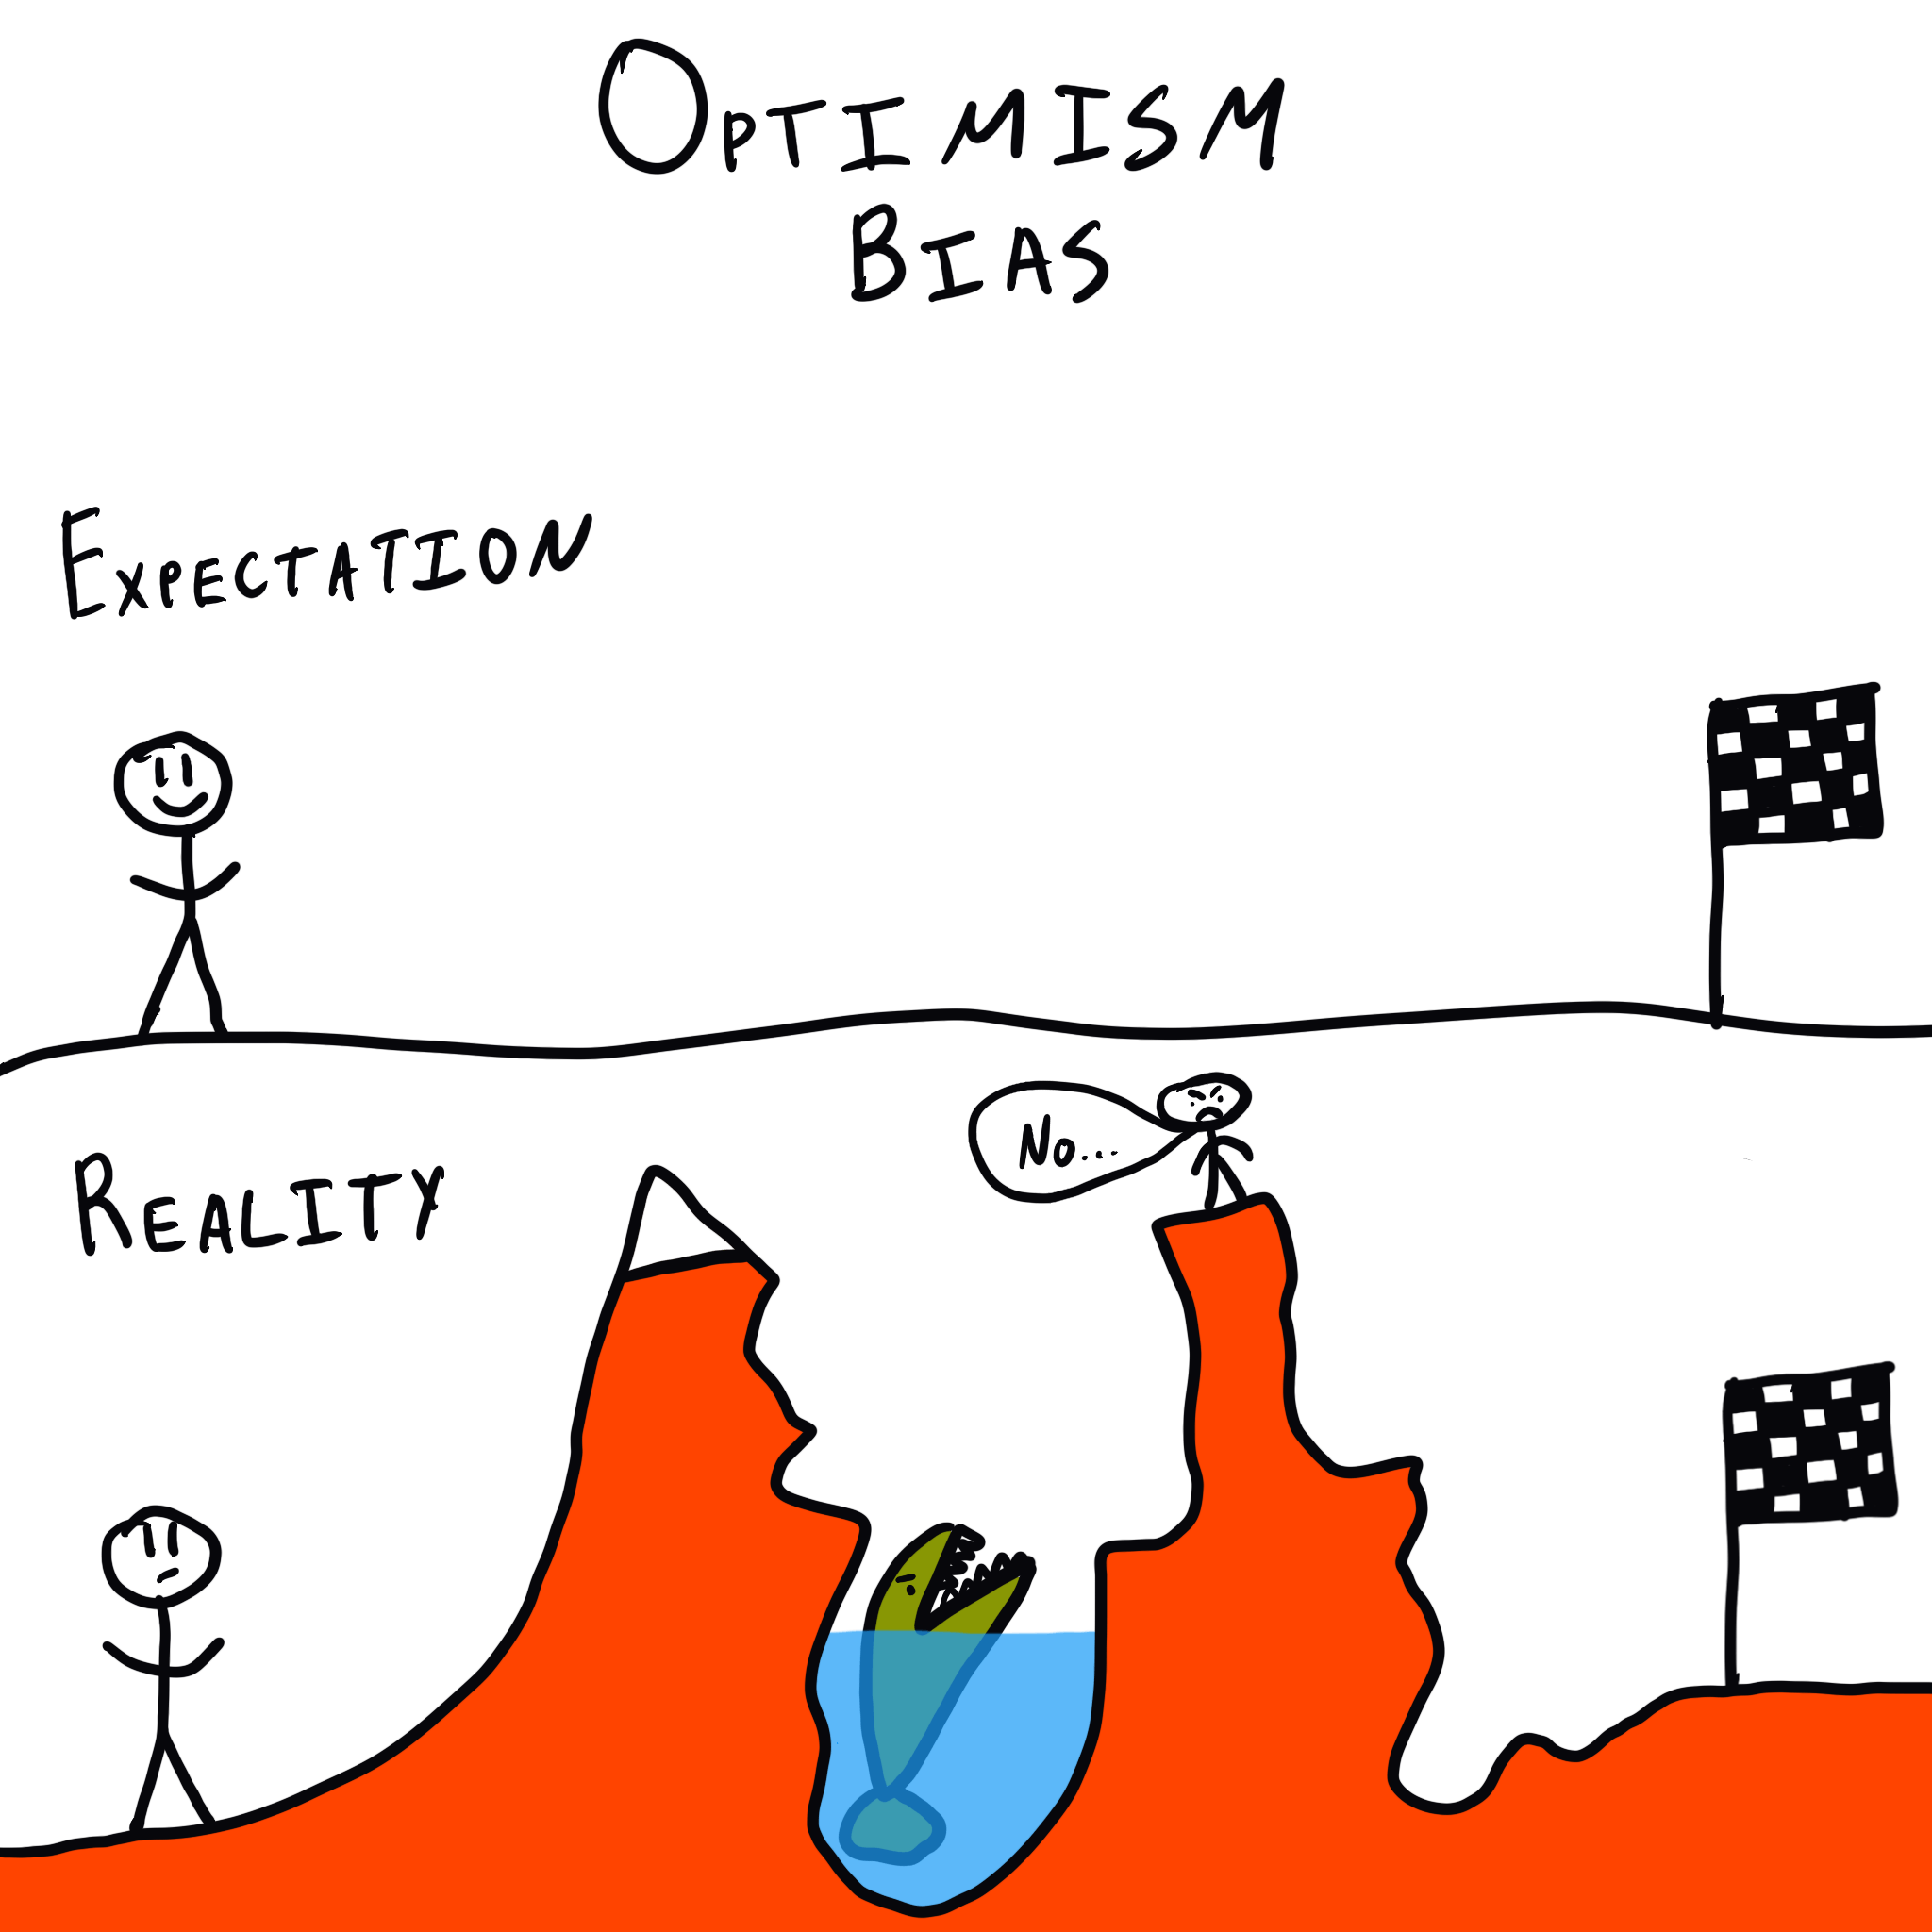 What is Survivorship bias (and how to avoid it) - Sketchy Ideas %